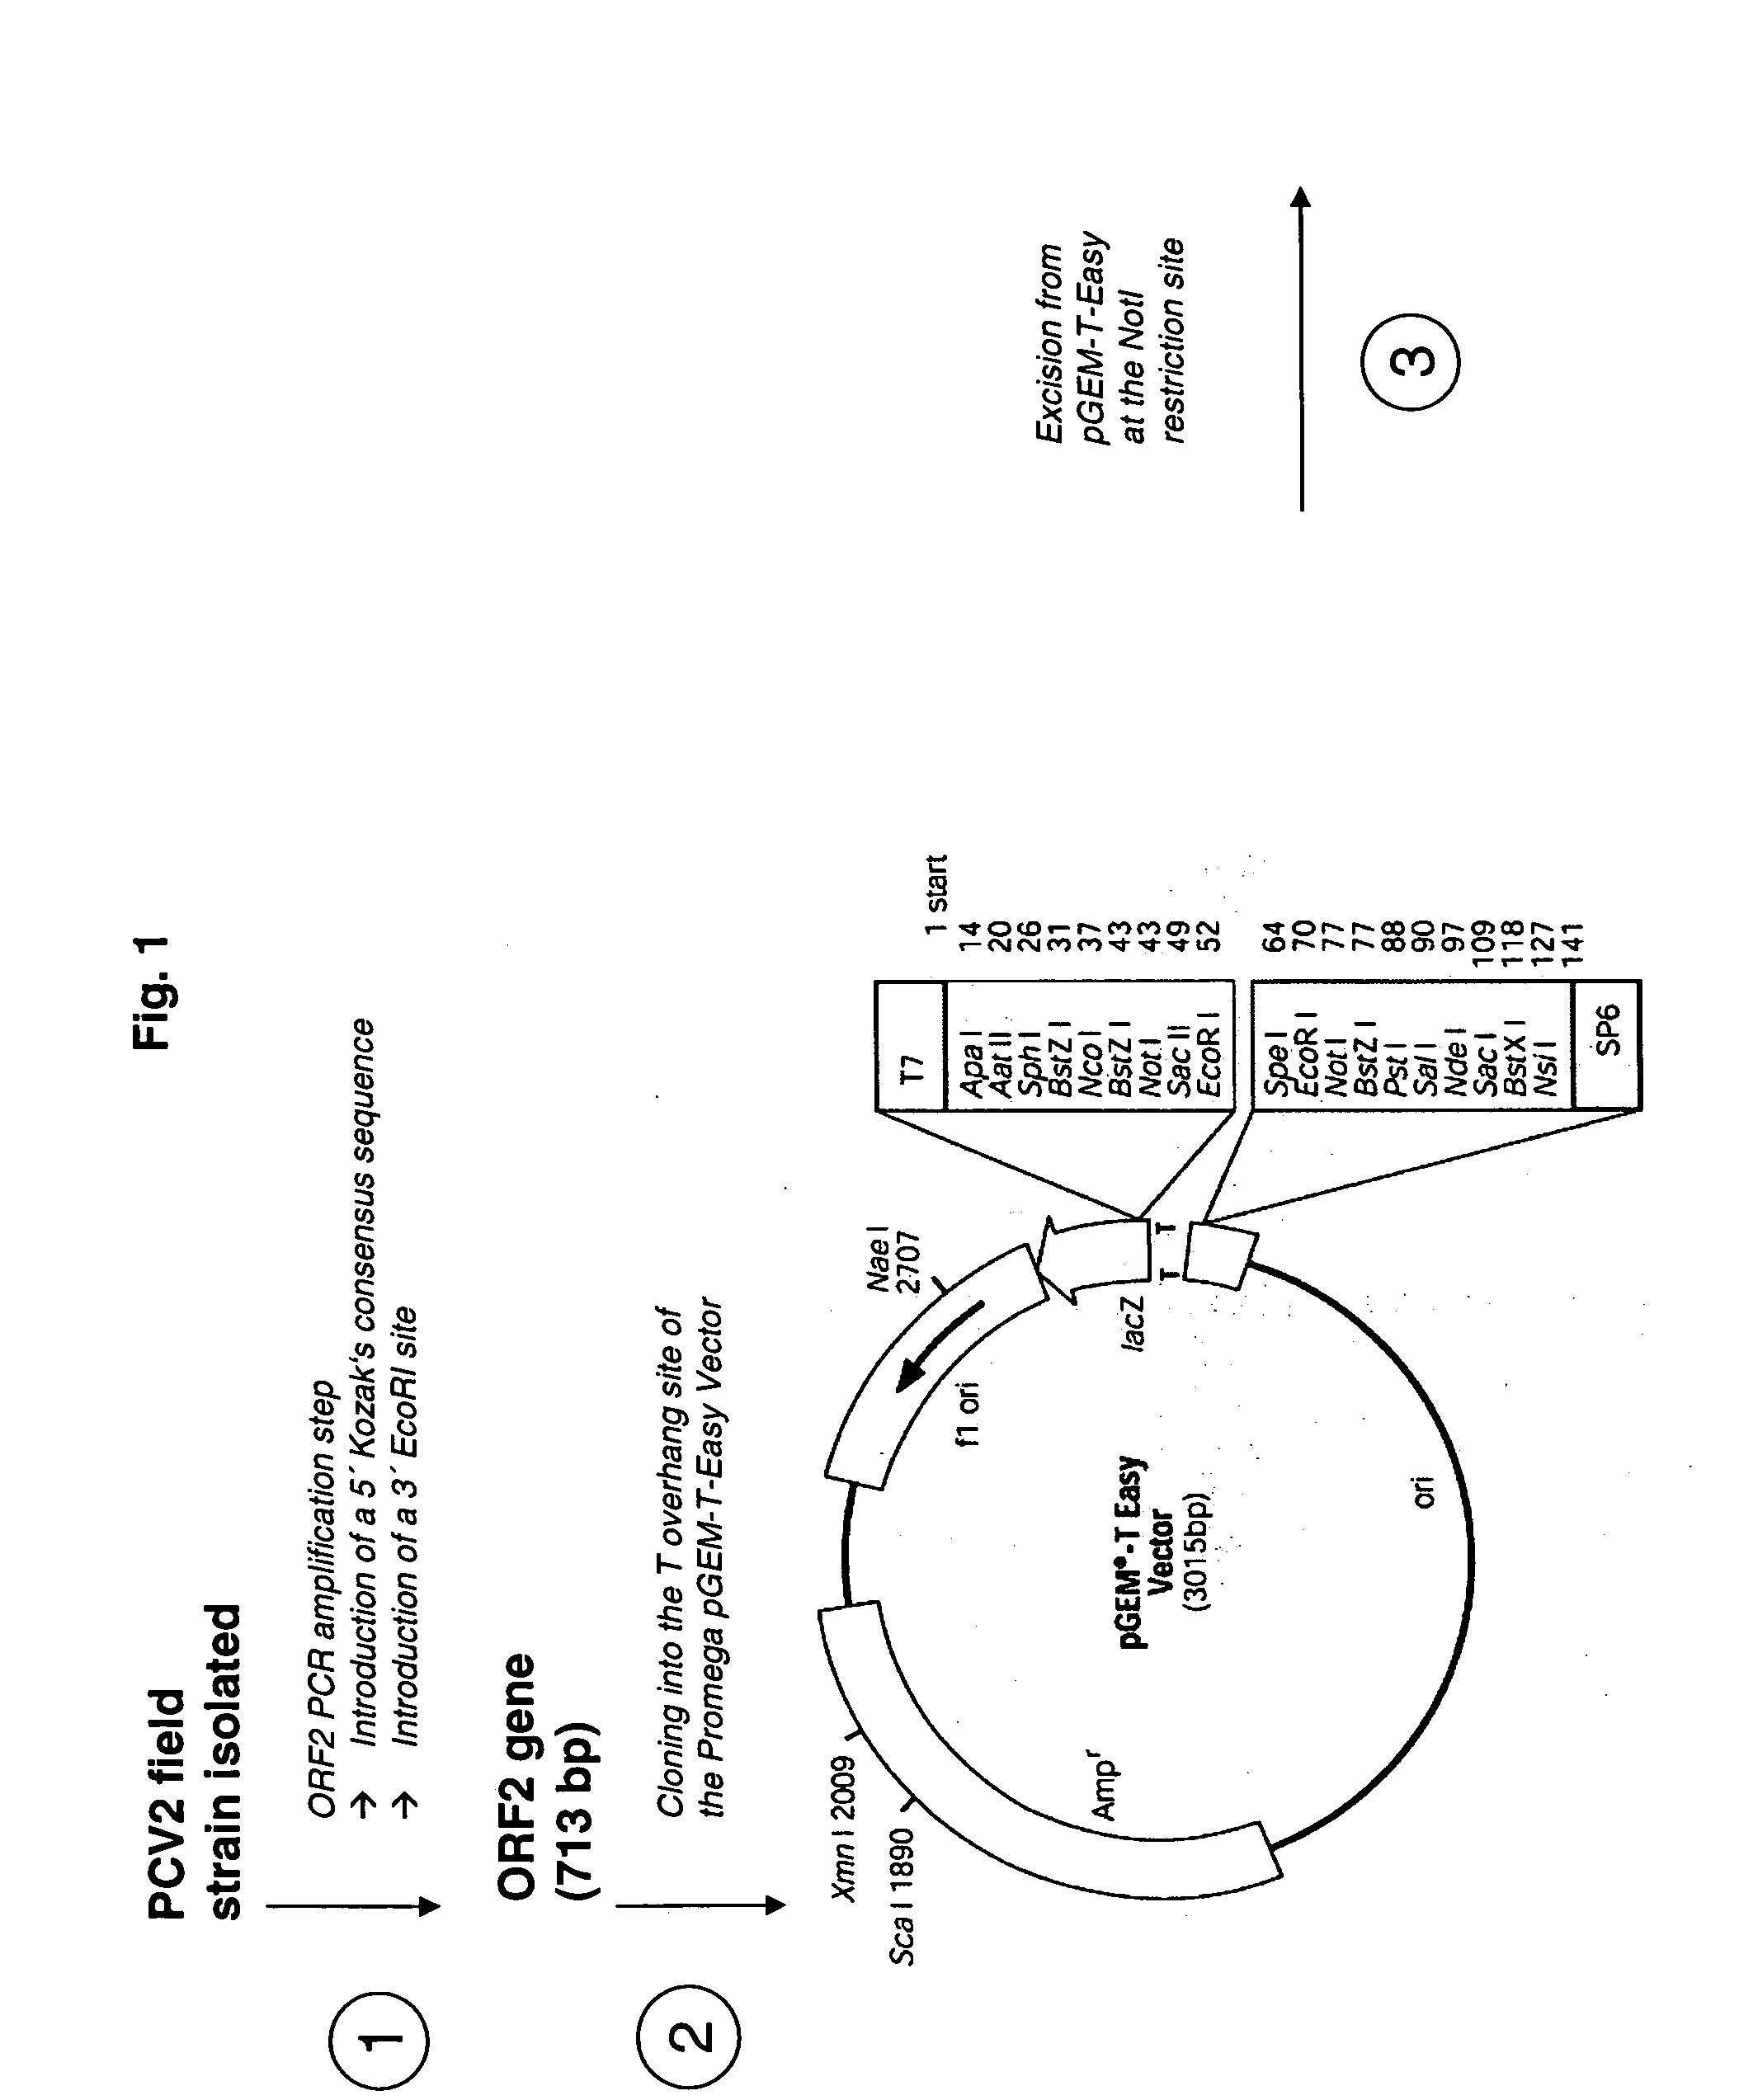 Multivalent pcv2 immunogenic compositions and methods of producing such compositions